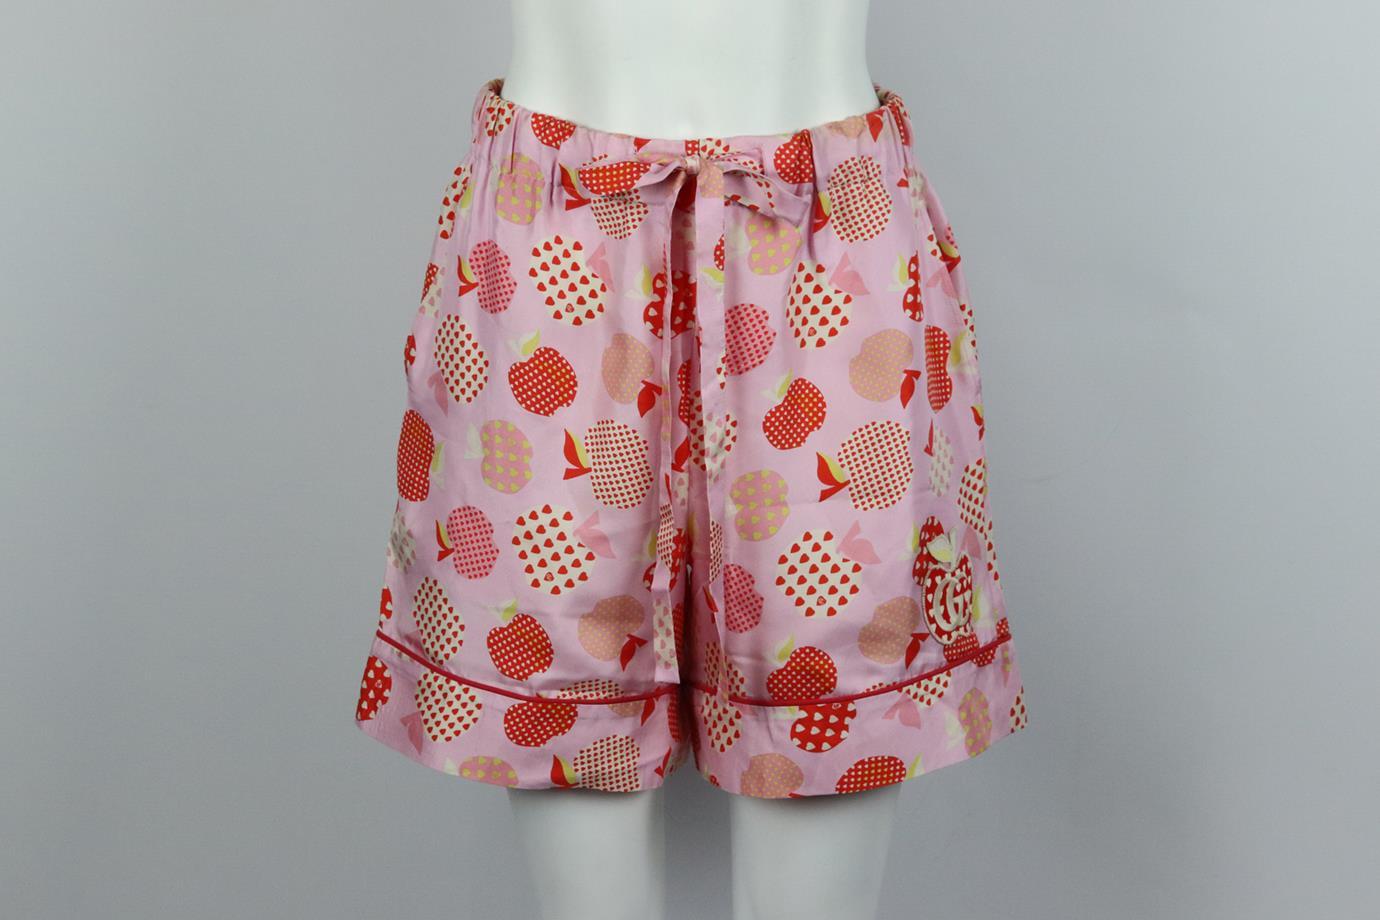 Gucci printed silk twill shorts. Pink, white and red. Pull on. 100% Silk; fabirc2: 100% cotton; fabric3: 50% cotton, 50% polyester. Size: IT 42 (UK 10, US 6, FR 38). Waist: 30 in. Hips: 42.6 in. Length: 17 in. Inseam: 6 in. Rise: 12.5 in. Good